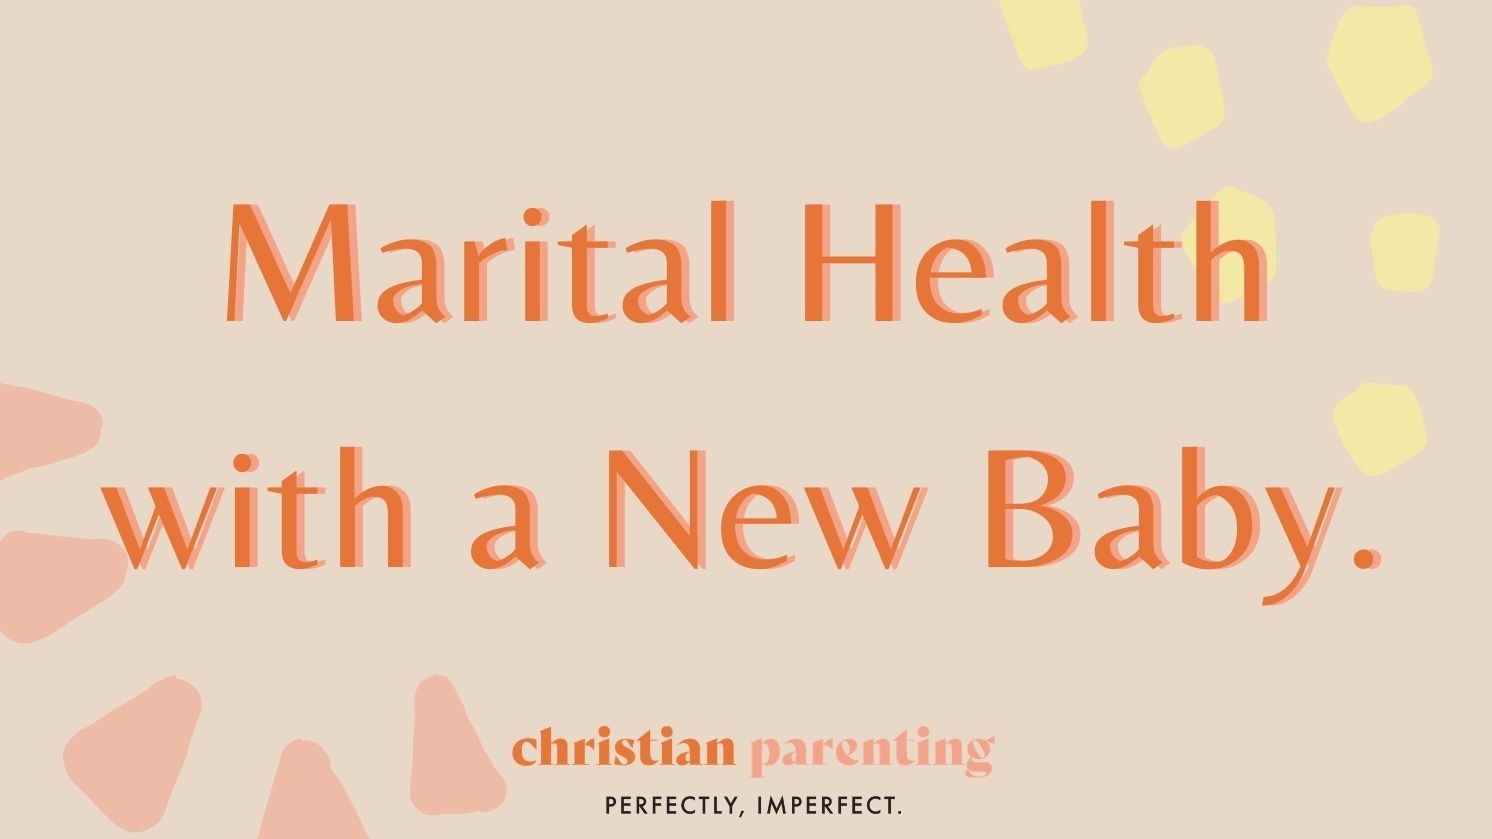 Marital Health with a New Baby